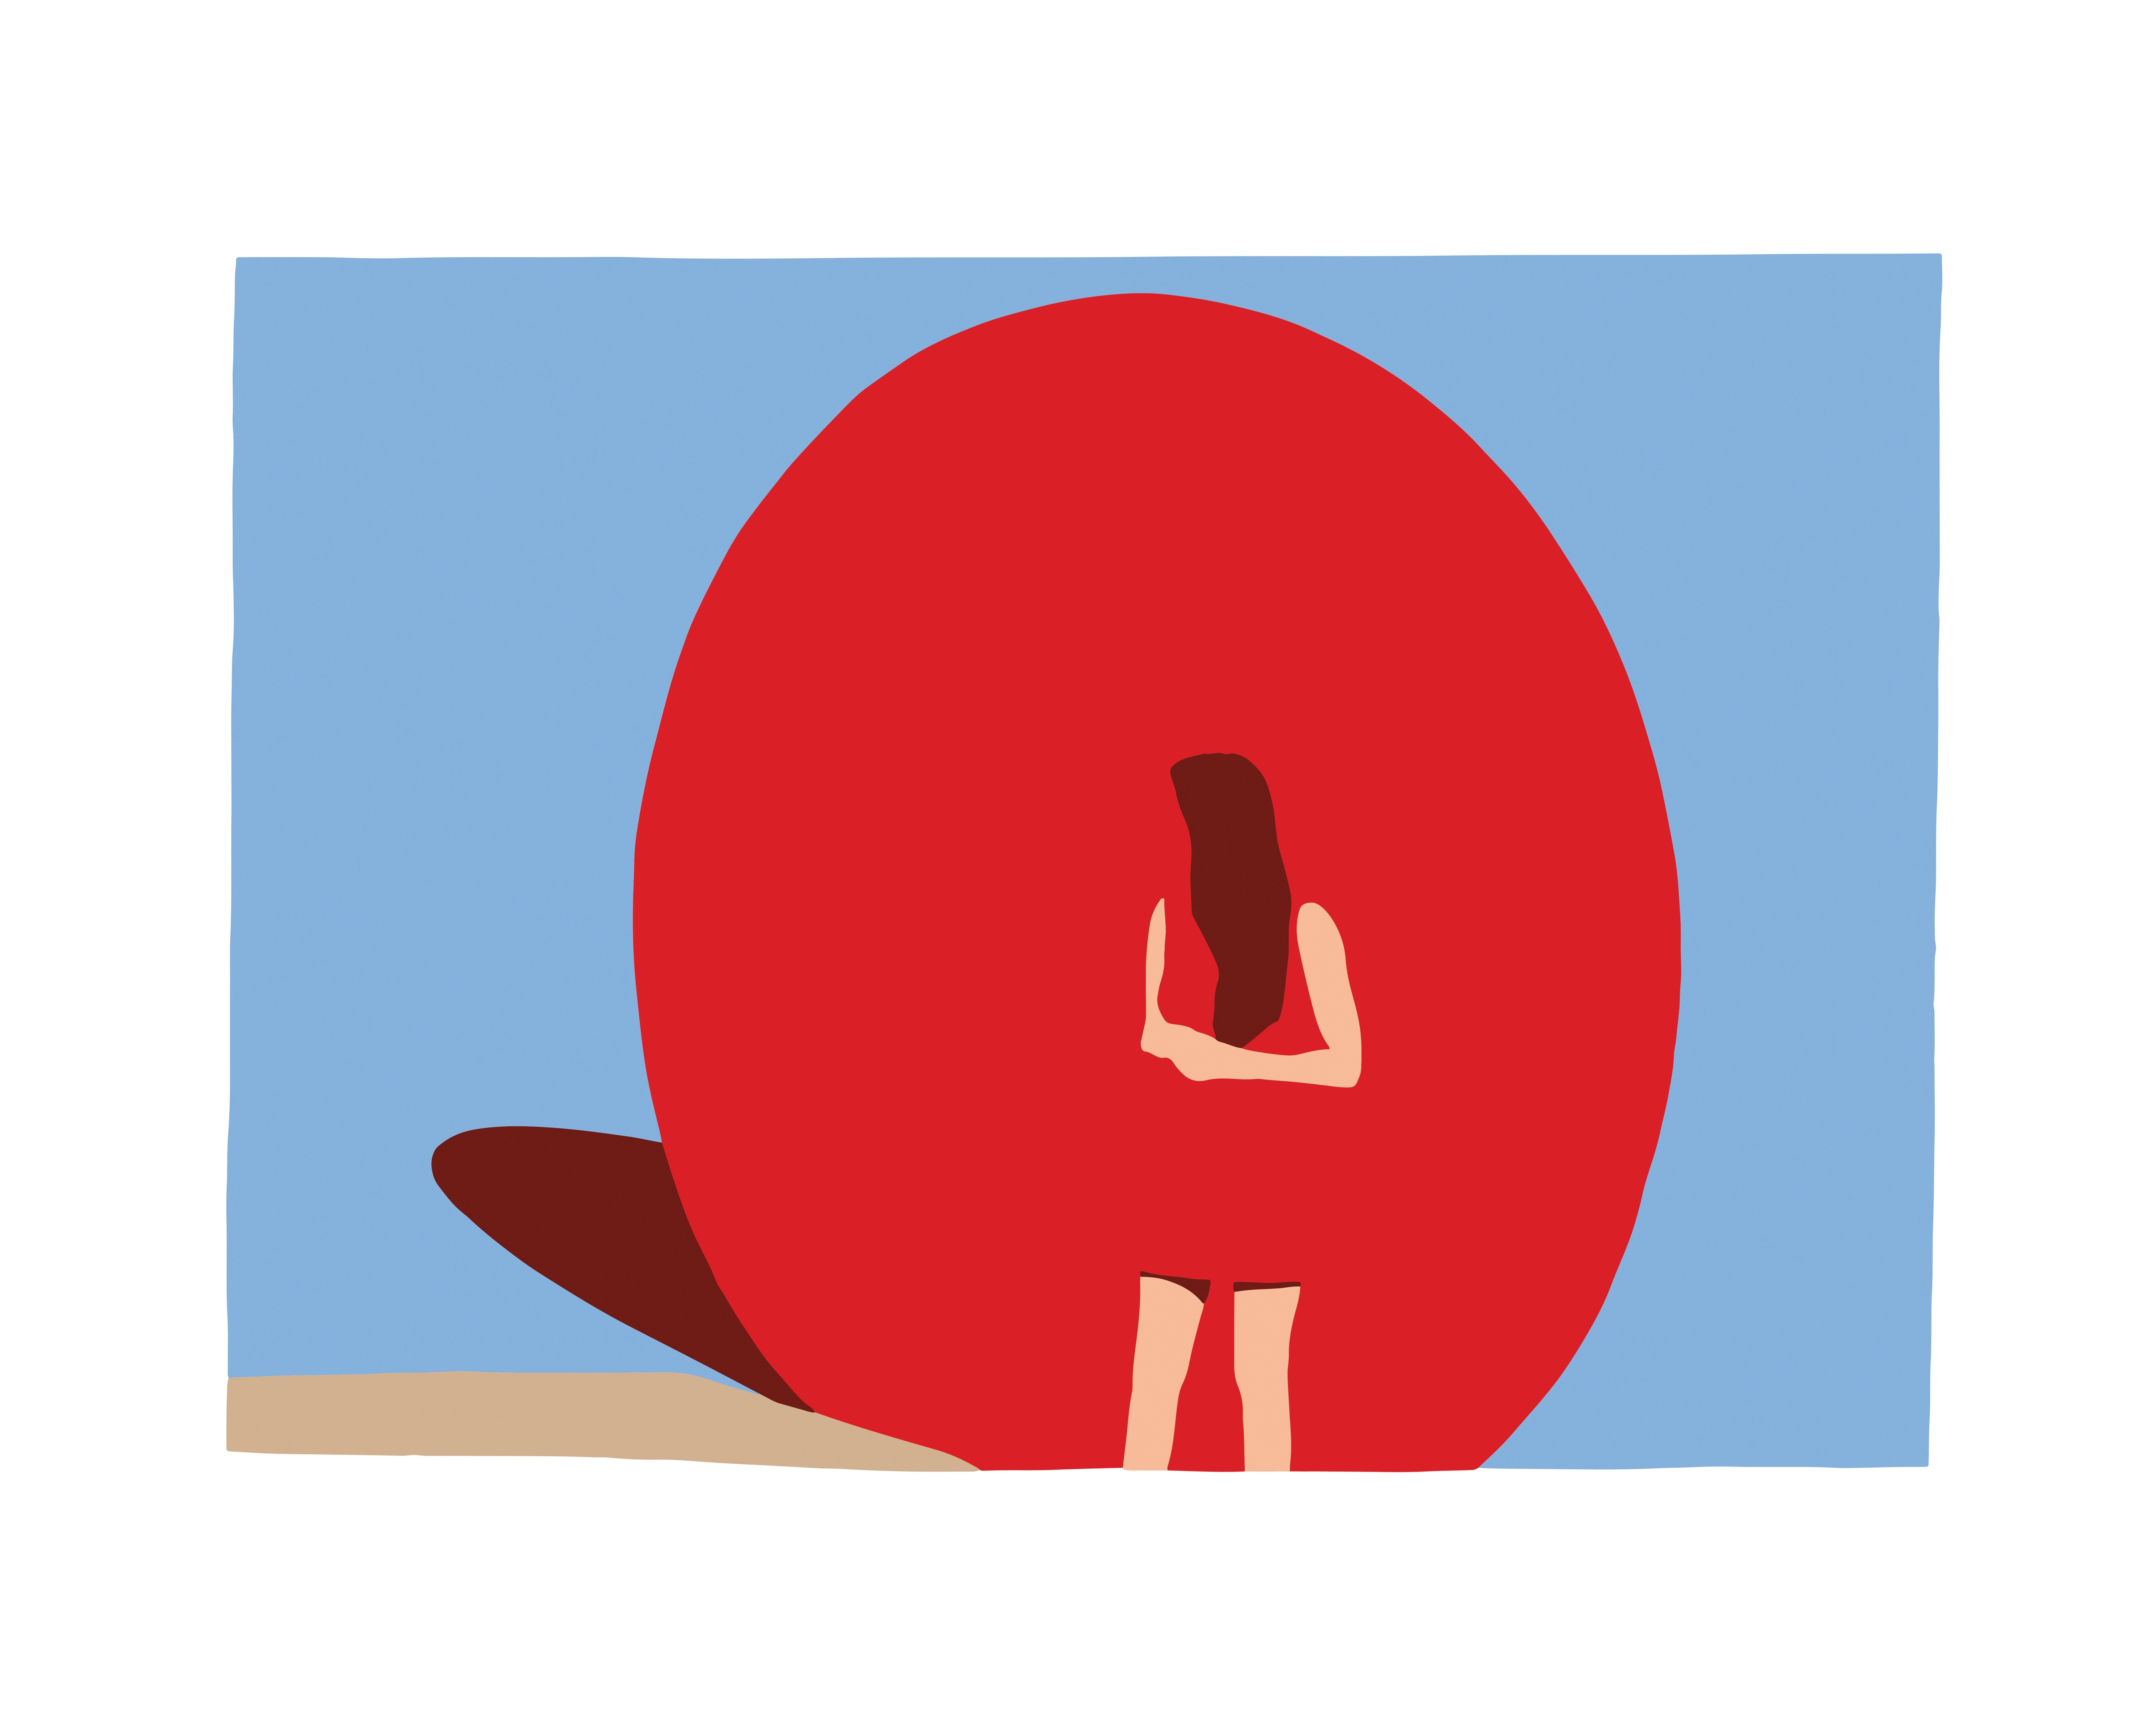 Casey Waterman Figurative Print - Red Ball,  From the “Why This Restlessness?” series. Limited edition print